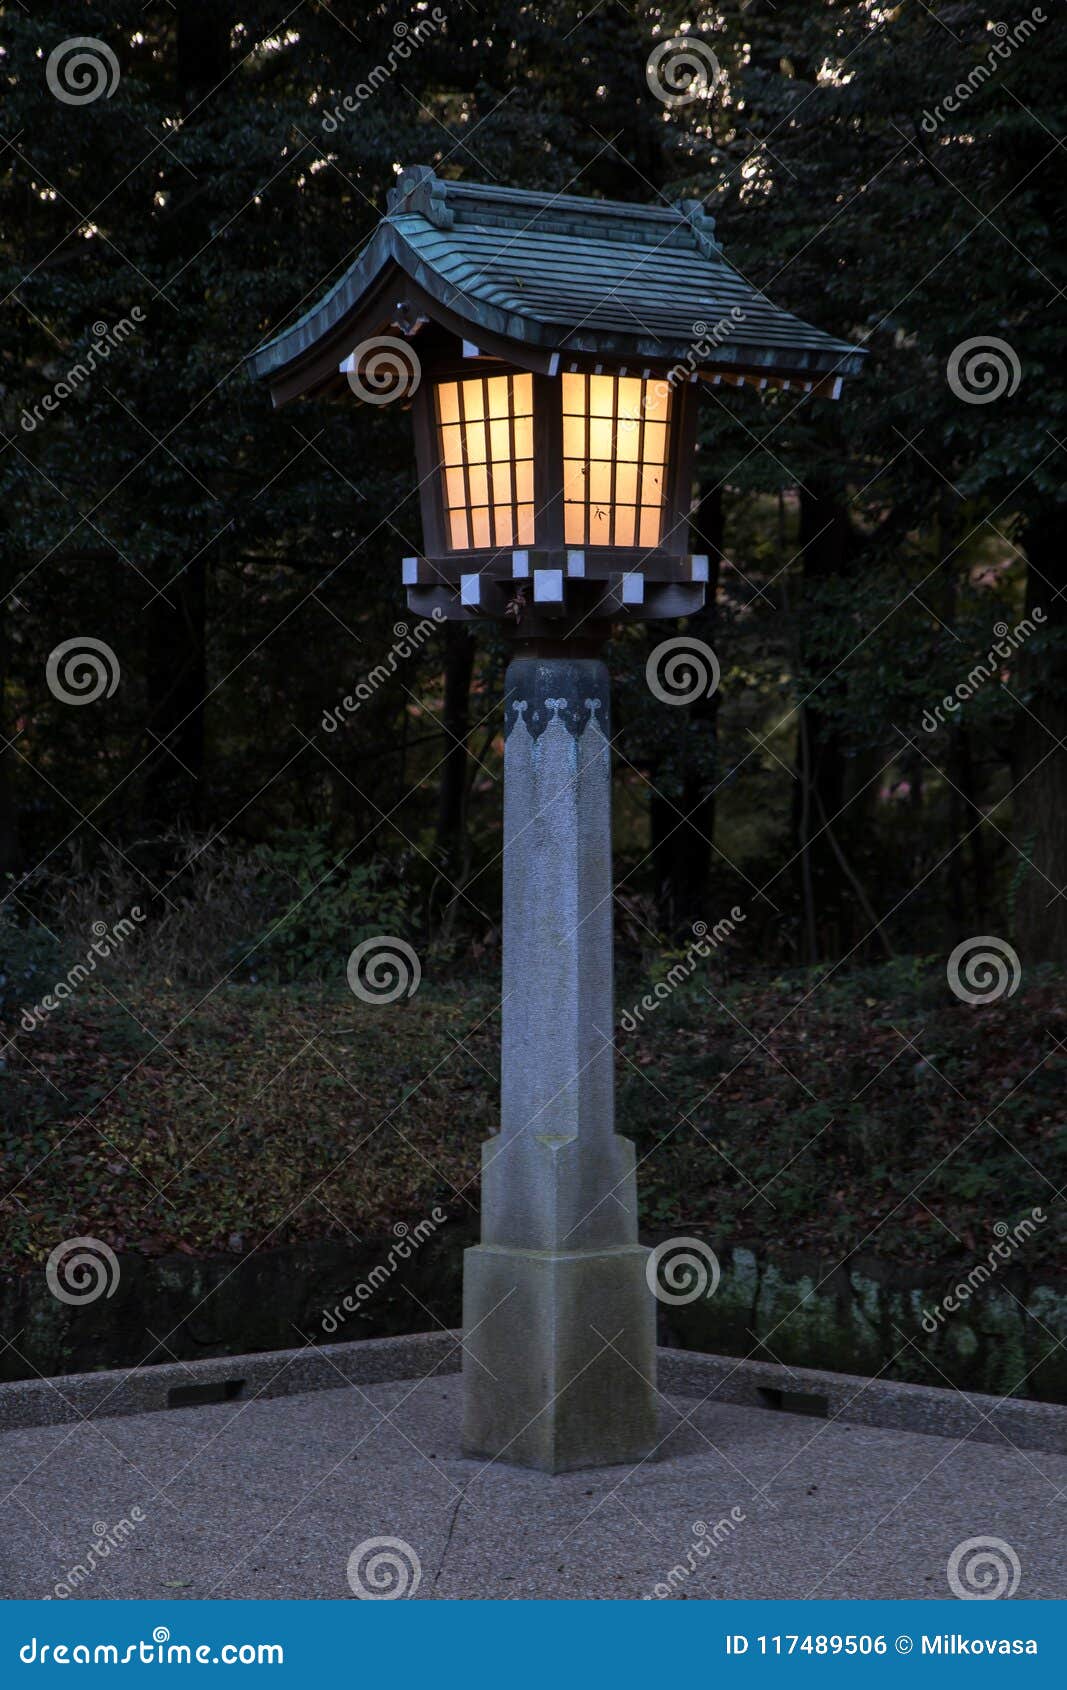 Street Lamp with Traditional Decoration Stock Photo - Image of evening ...